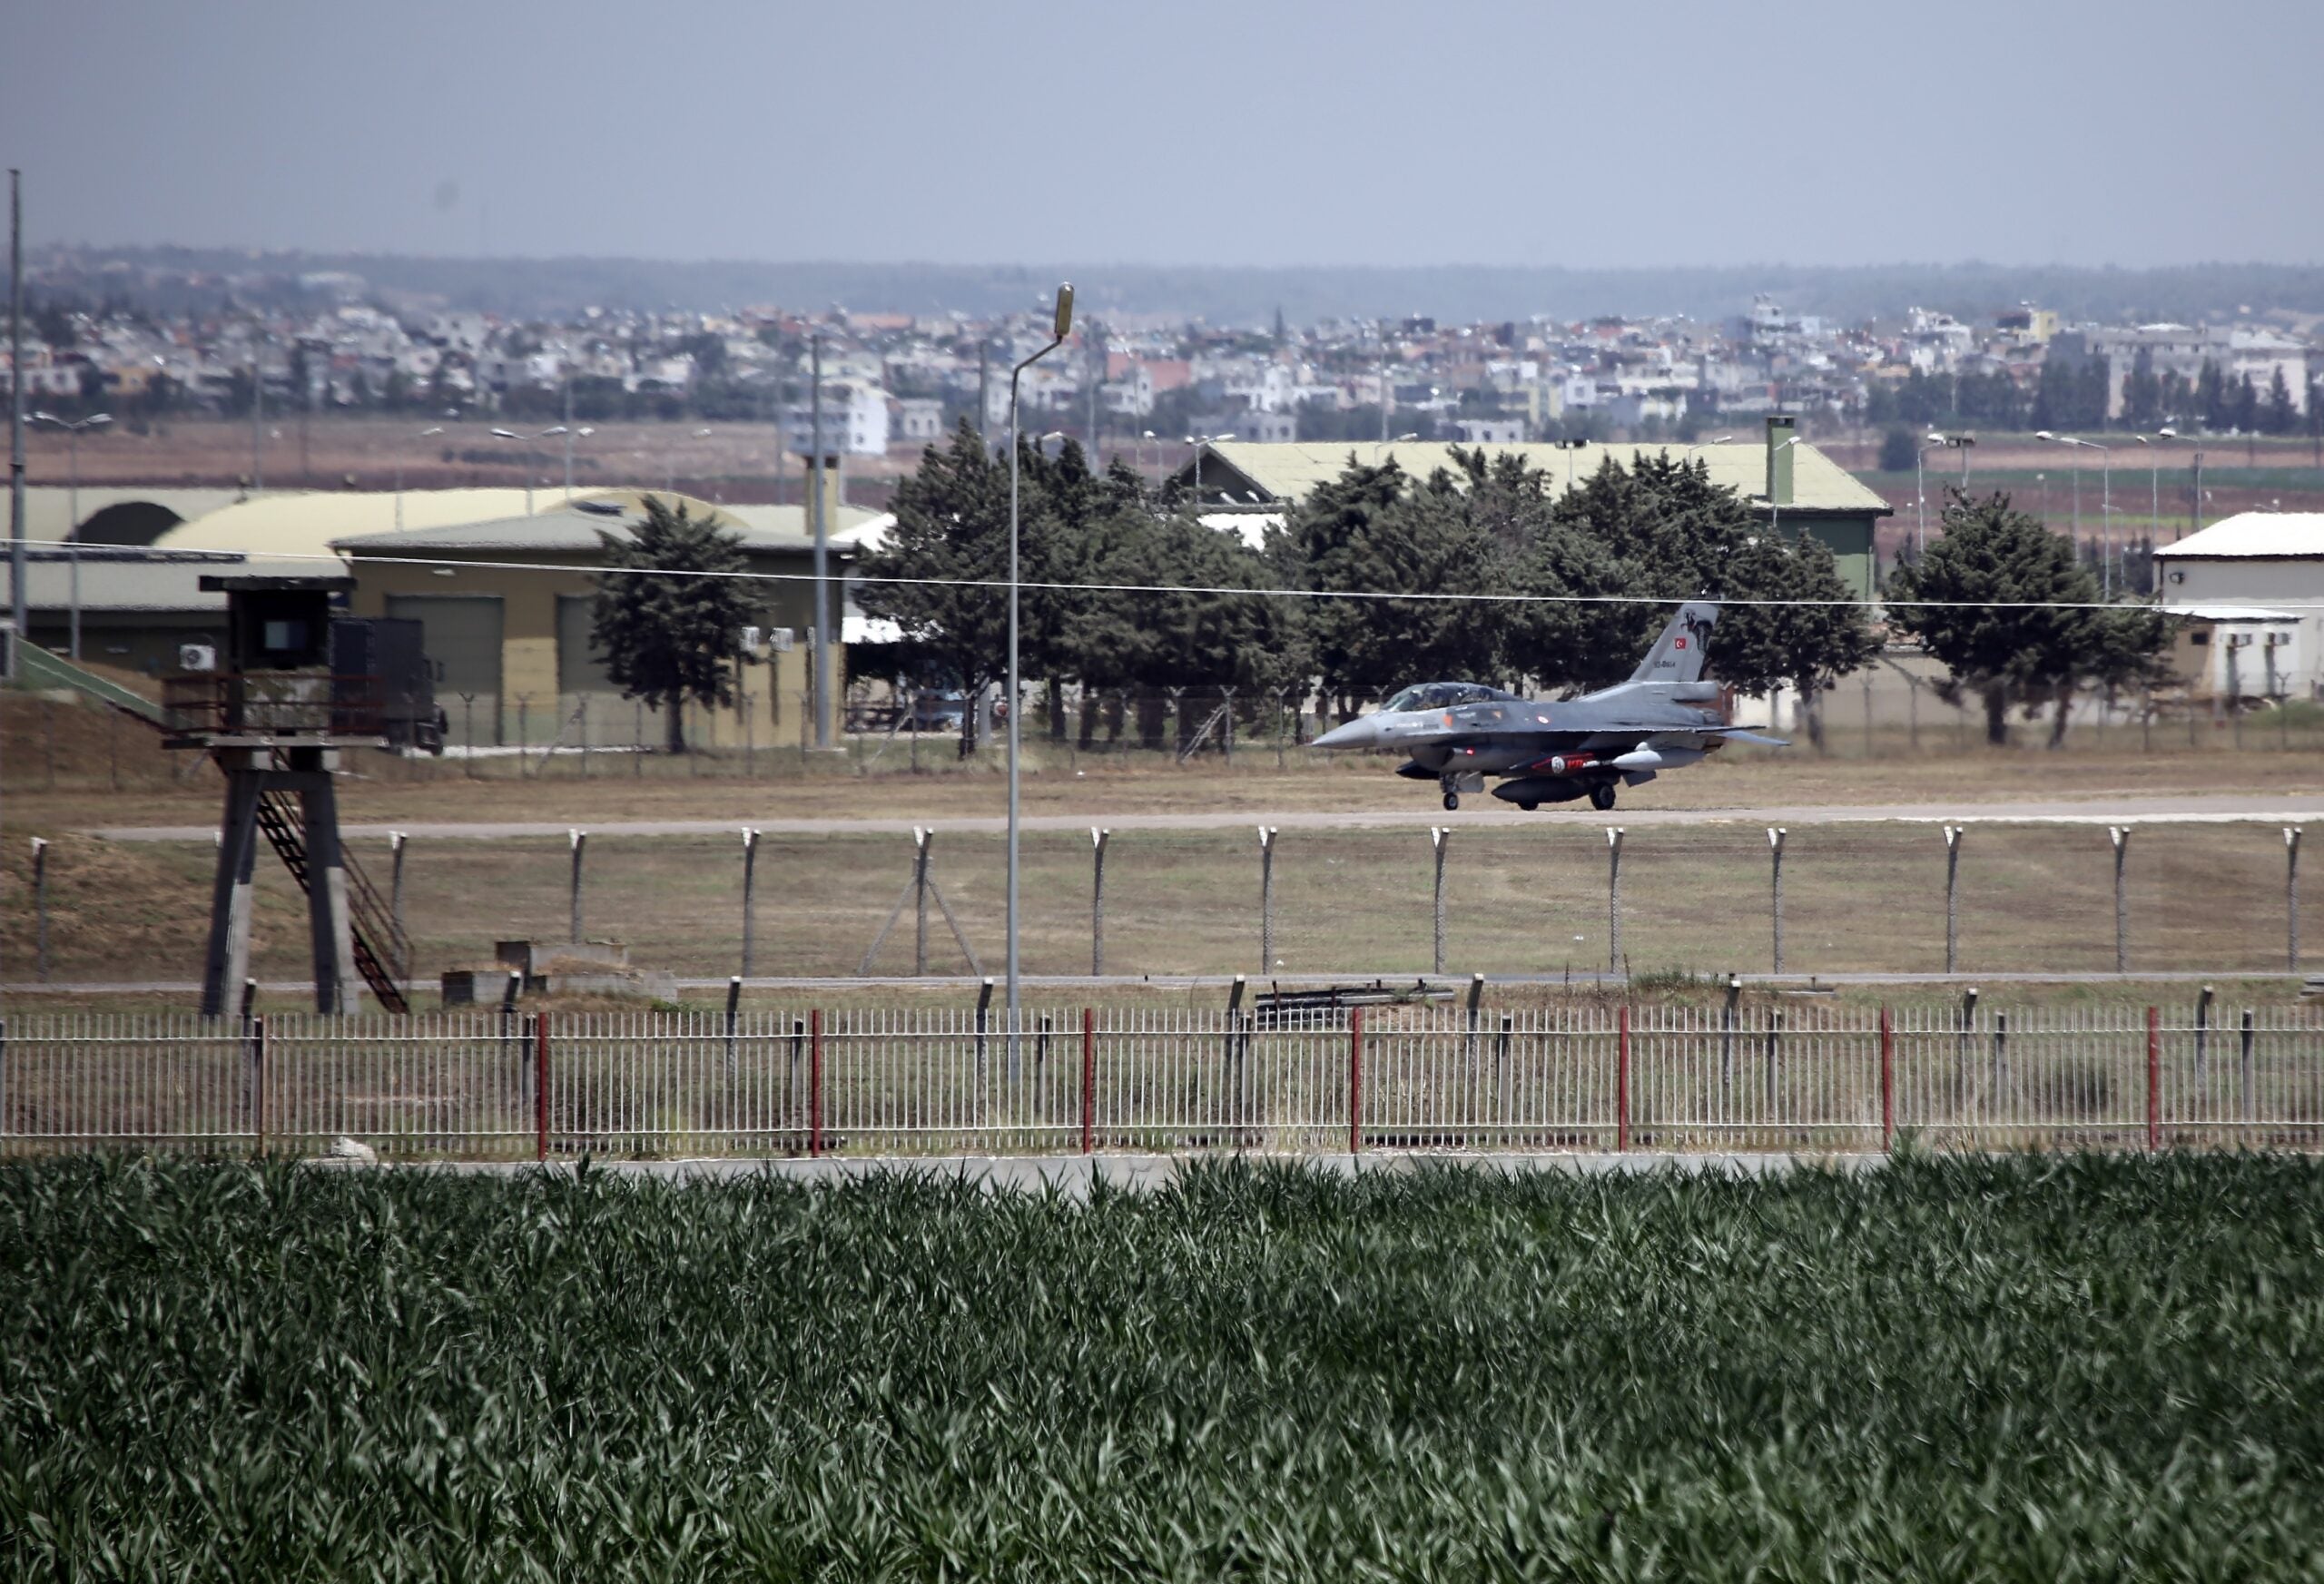 ADANA, TURKEY - JULY 25: Turkish F-16 fighter jets and tanker aircrafts land at the 10. tanker base command in ncirlik distrcit of Turkey's southern province Adana on July 25, 2015. Turkish fighter jets have conducted airstrikes on terrorist groups Daesh in Syria and the PKK in Iraq, the Prime Ministry announced early Saturday. (Photo by Ibrahim Erikan/Anadolu Agency/Getty Images)